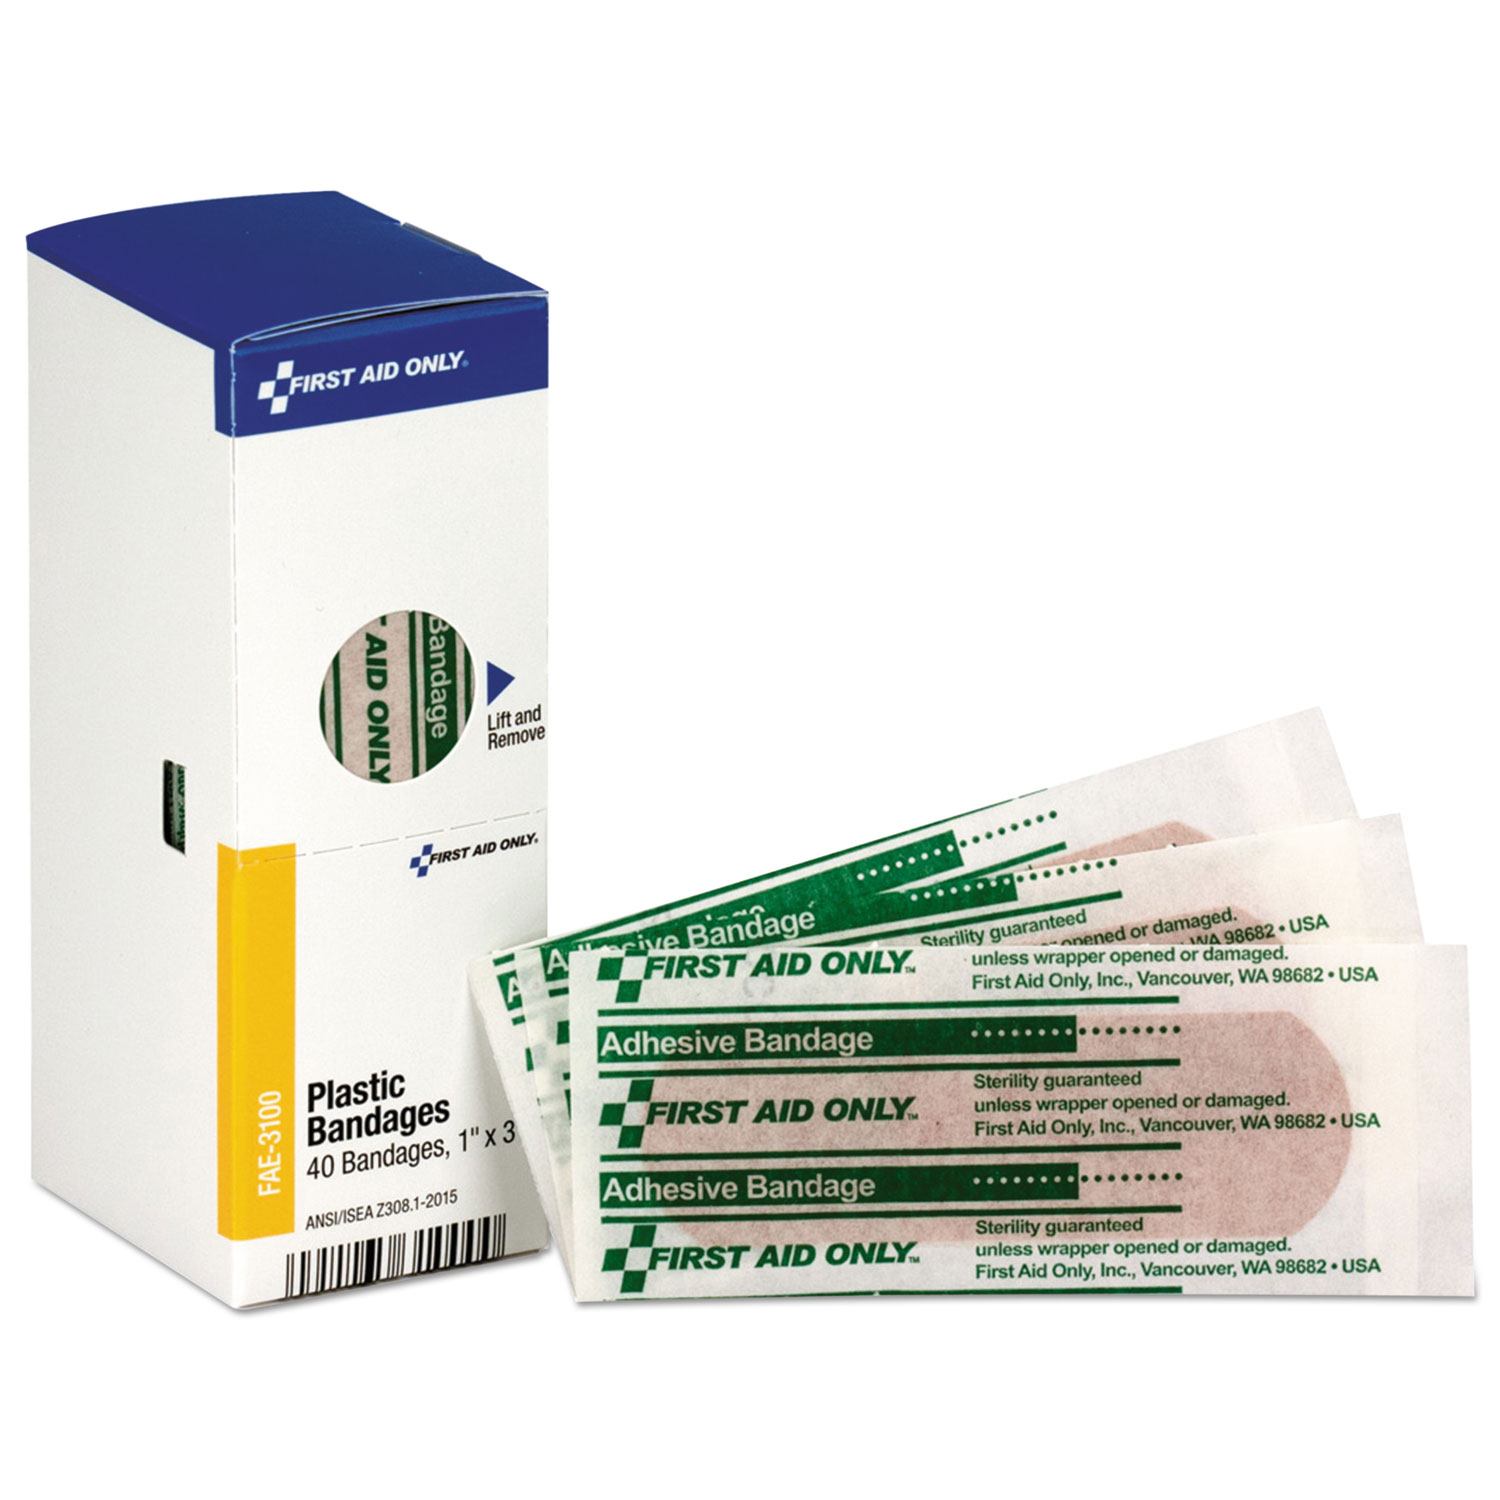  First Aid Only FAE-3100 Refill for SmartCompliance General Business Cabinet, Plastic Bandages,1x3, 40/Bx (FAOFAE3100) 